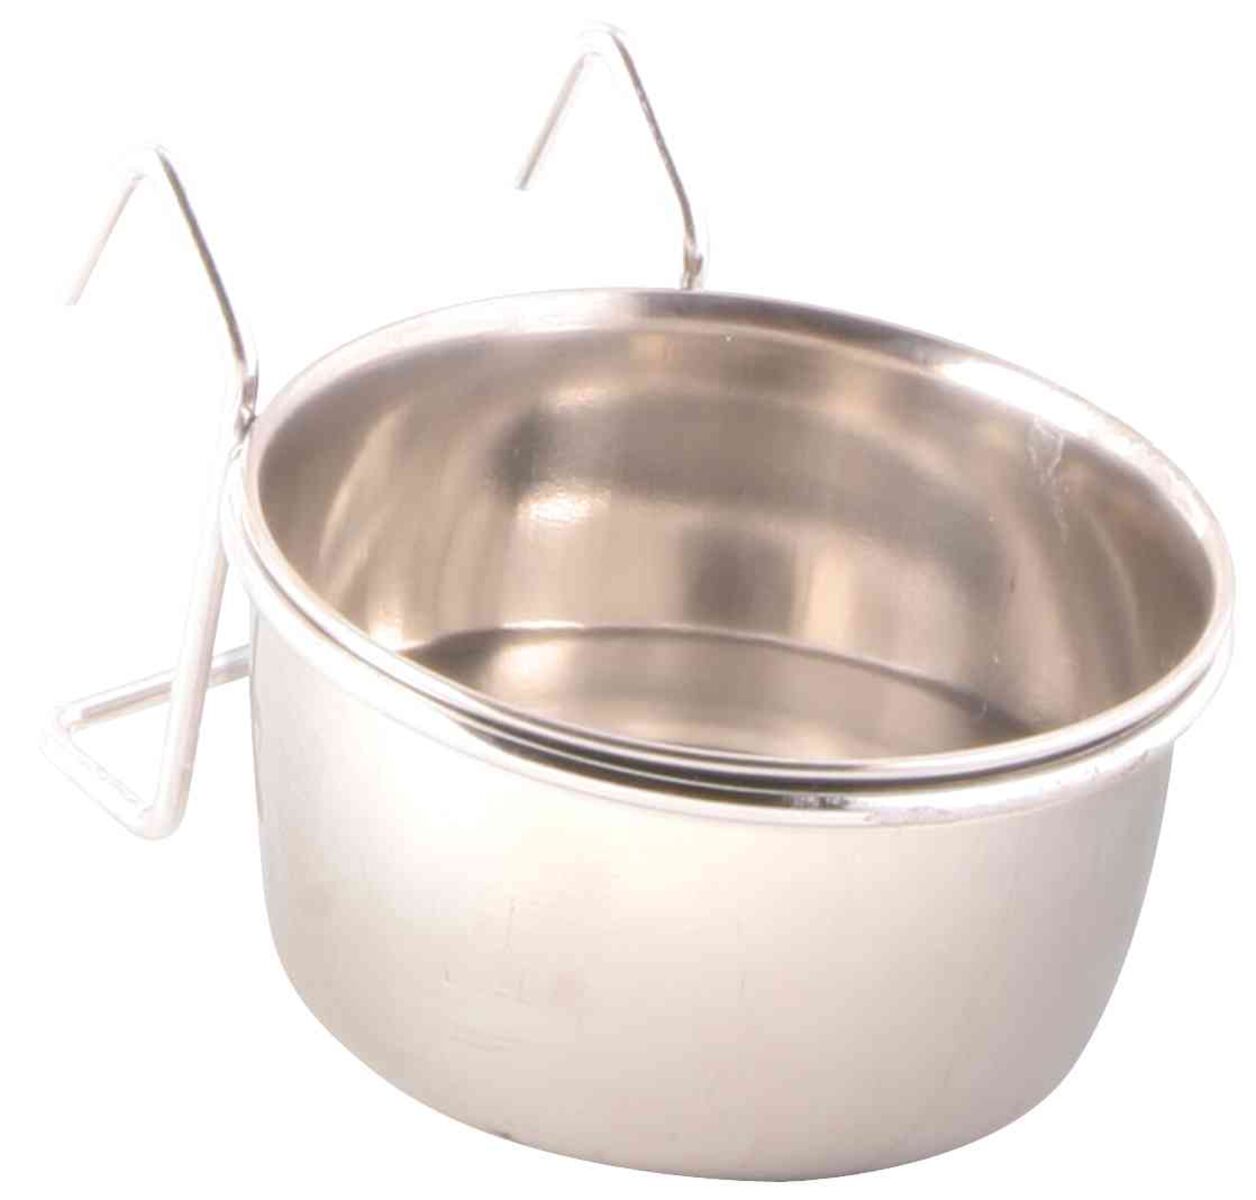 Stainless-steel bowl with handle